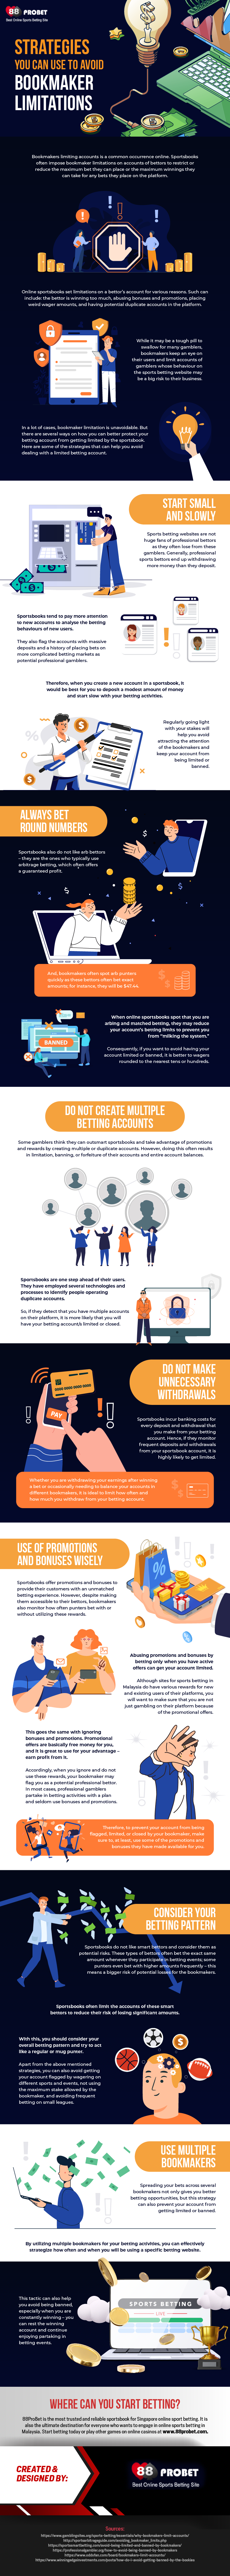 Strategies-You-Can-Use-to-Avoid-Bookmakers-Limitations-Infographic